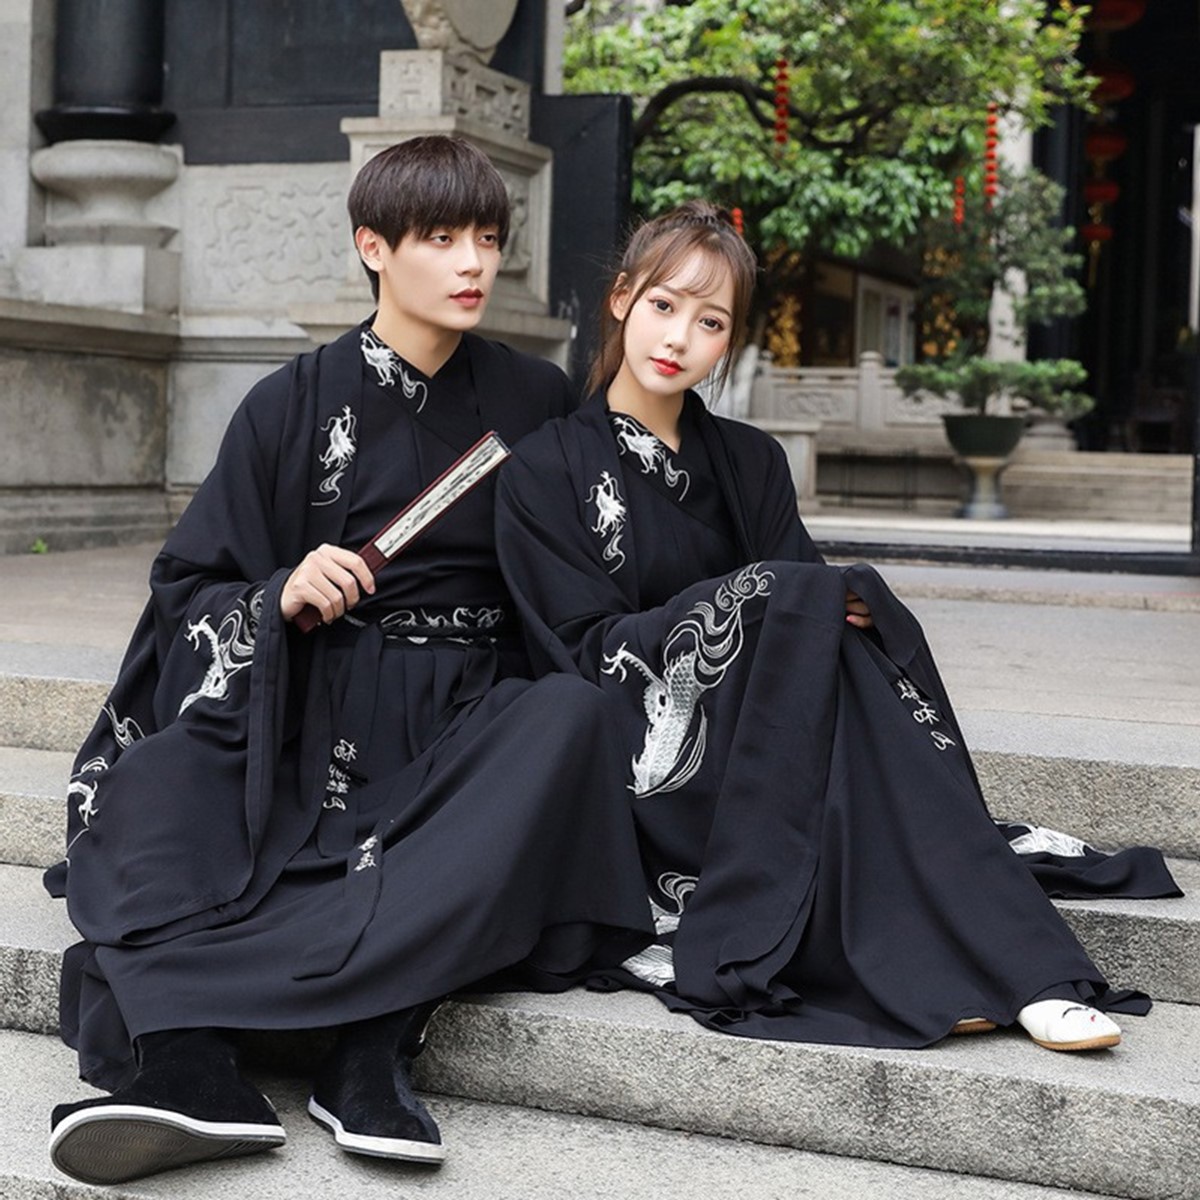 2021 Best Chinese Traditional Clothing | Black Hanfu Dress For Women ...